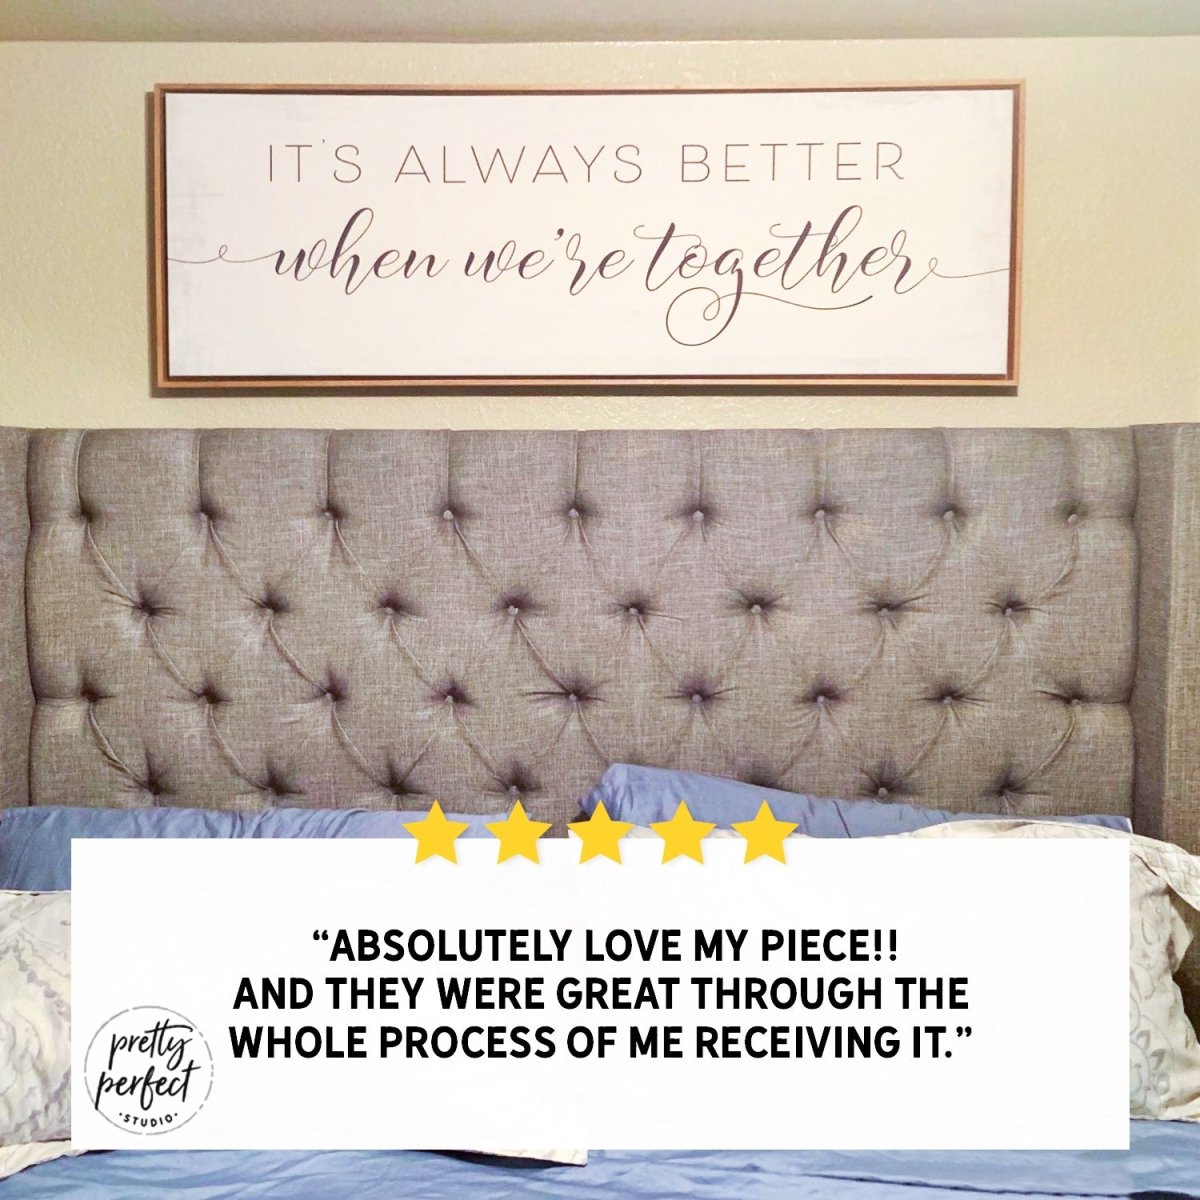 Customer product review for it's always better when we're together sign by Pretty Perfect Studio